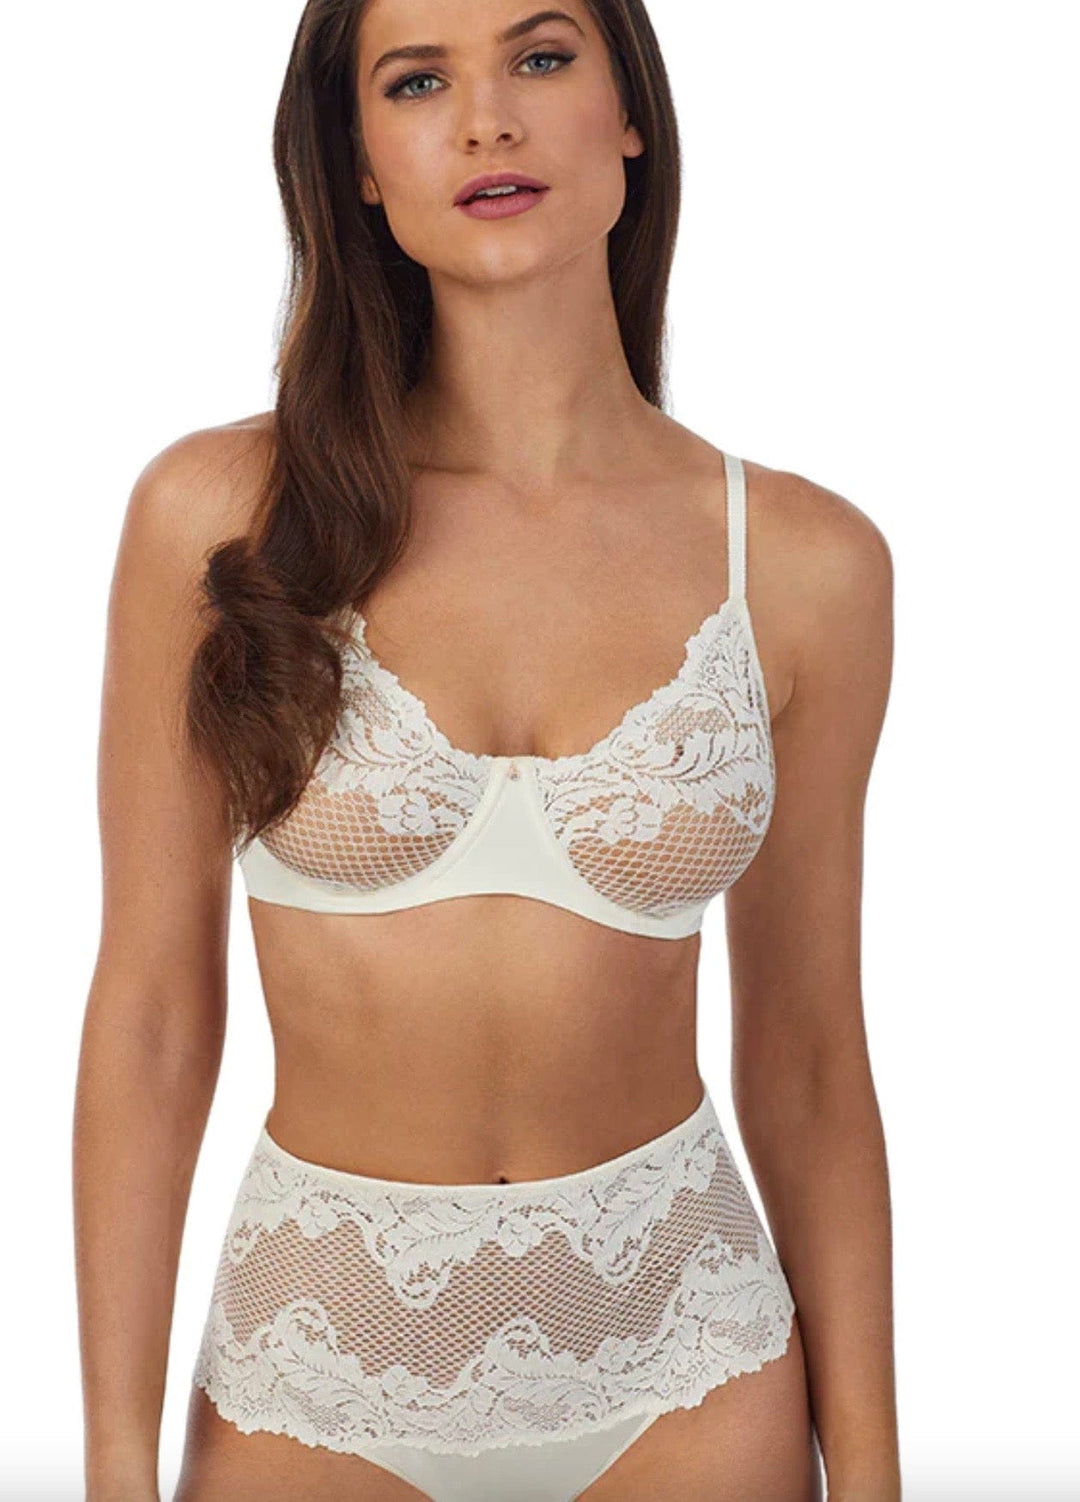 Cosabella Paradiso V-Hipster in Rossa/White FINAL SALE (40% Off